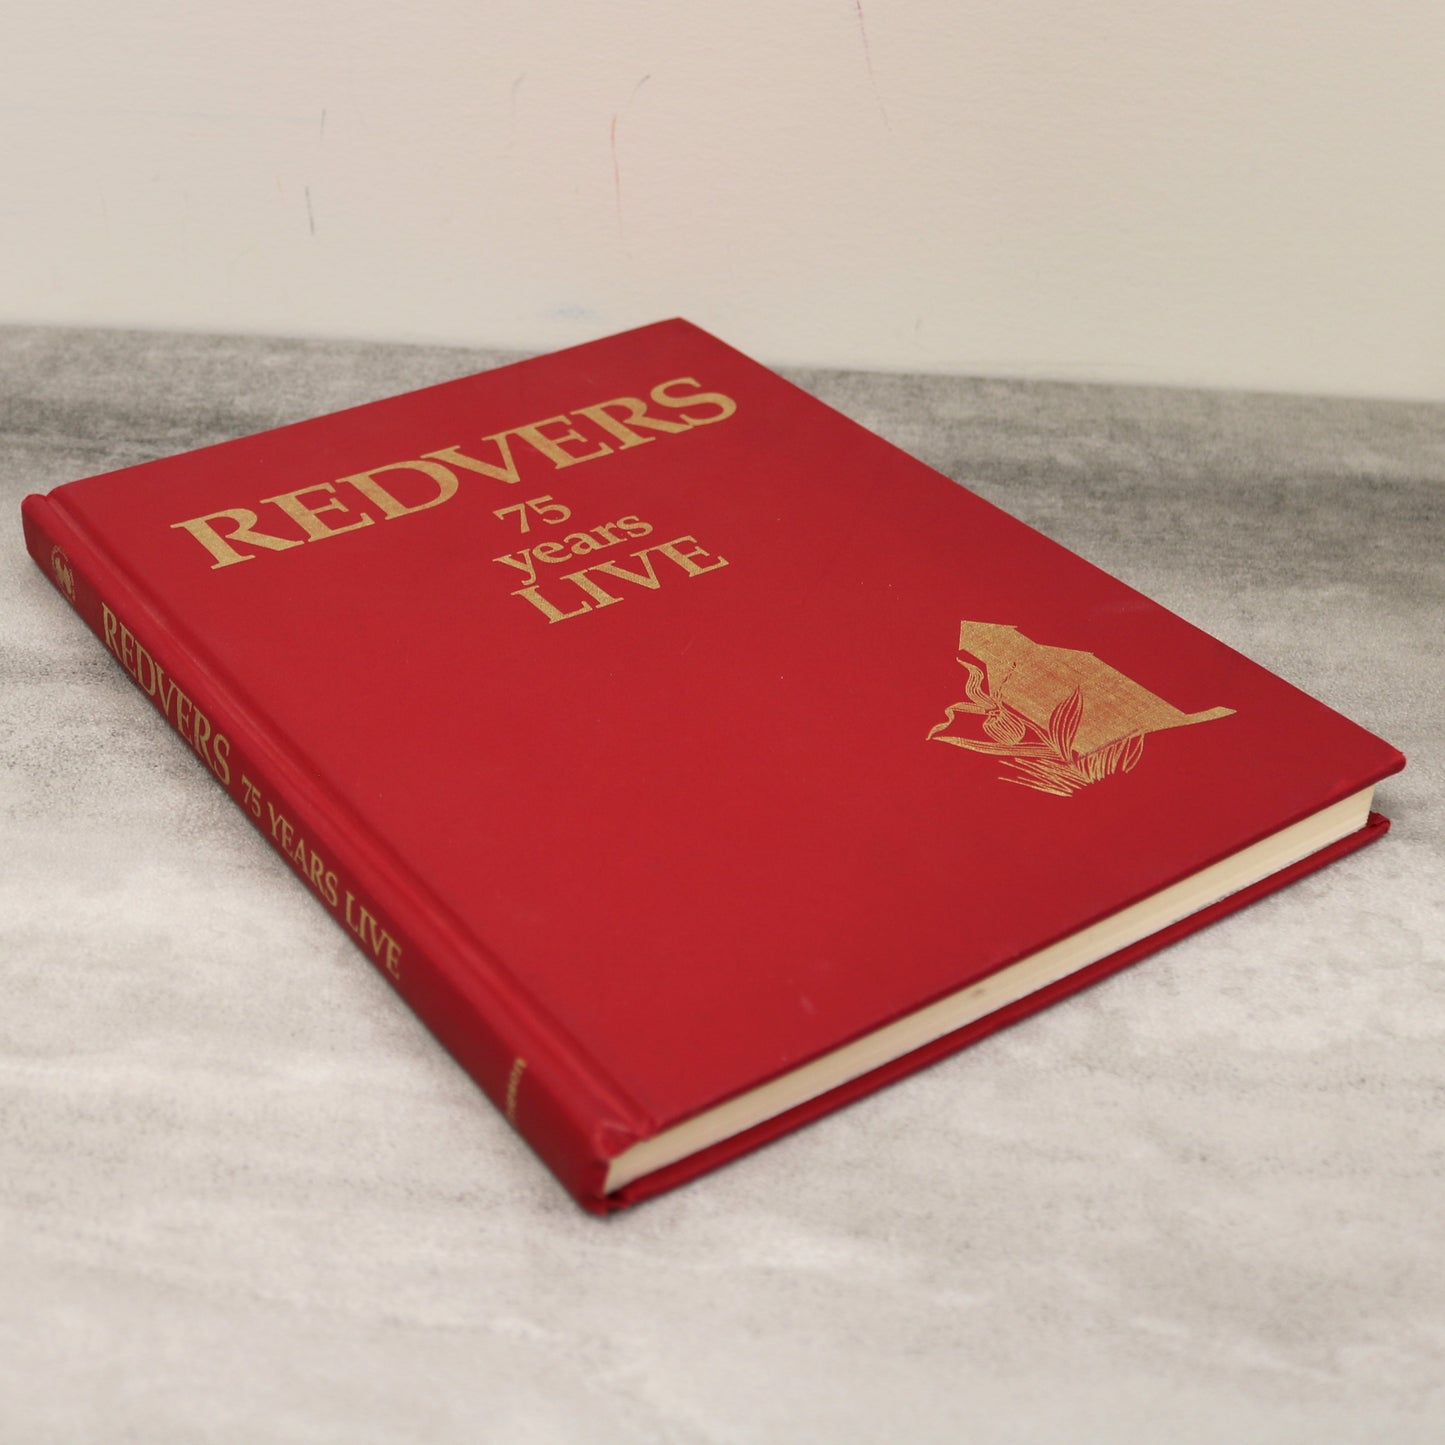 Redvers 75 Years Live Saskatchewan Canada Canadian Local History Used Book